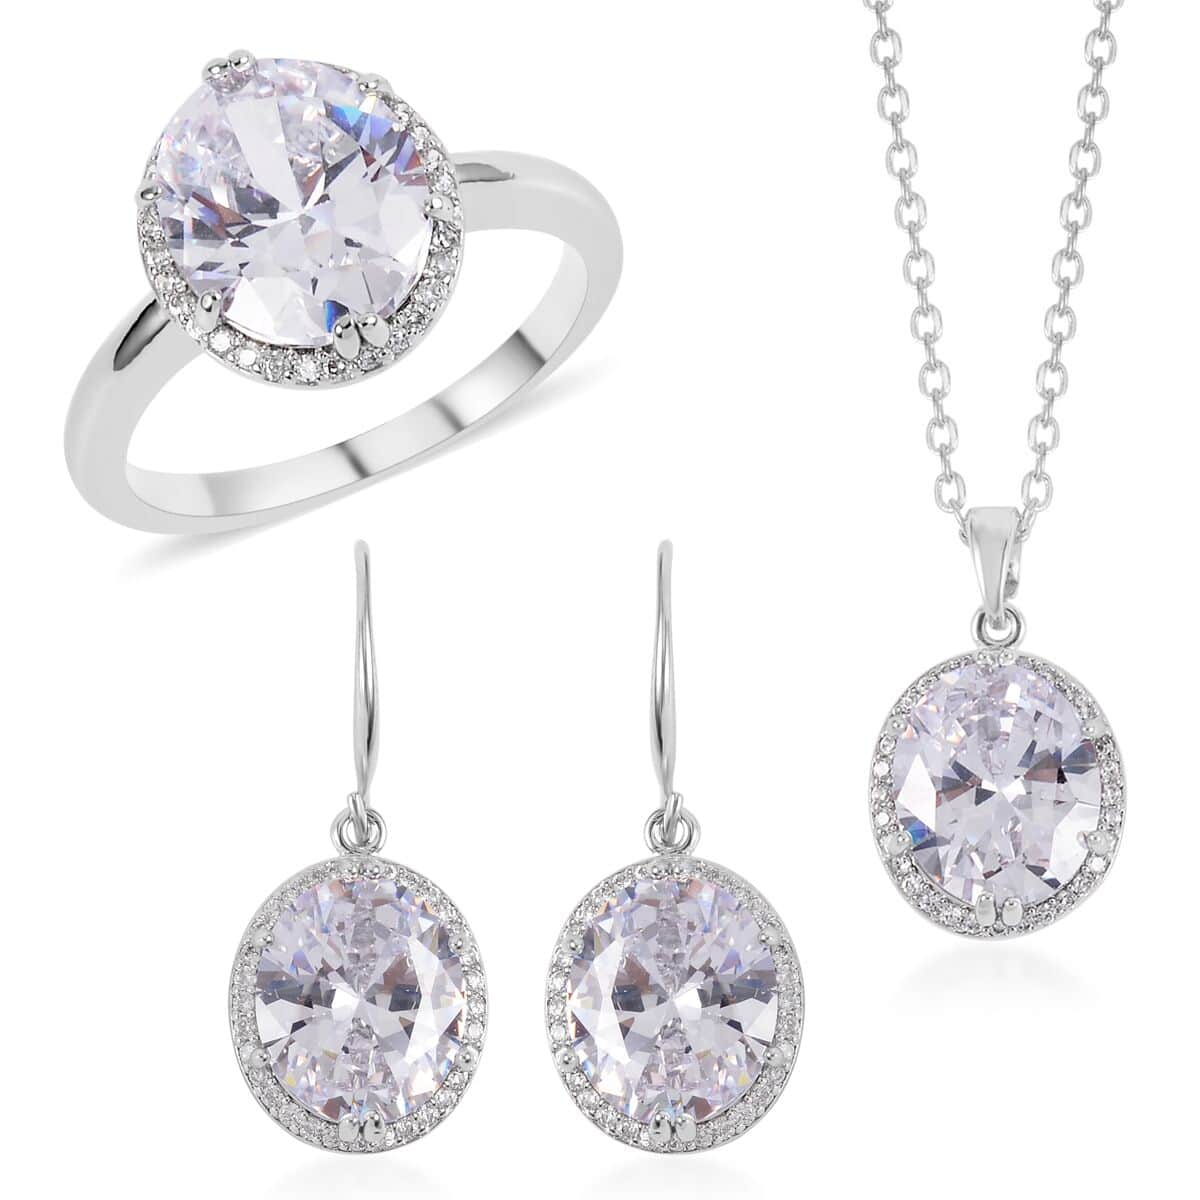 Simulated White Diamond Earrings, Halo Ring (Size 7.0) and Pendant Necklace in Silvertone 20-22 Inches image number 0